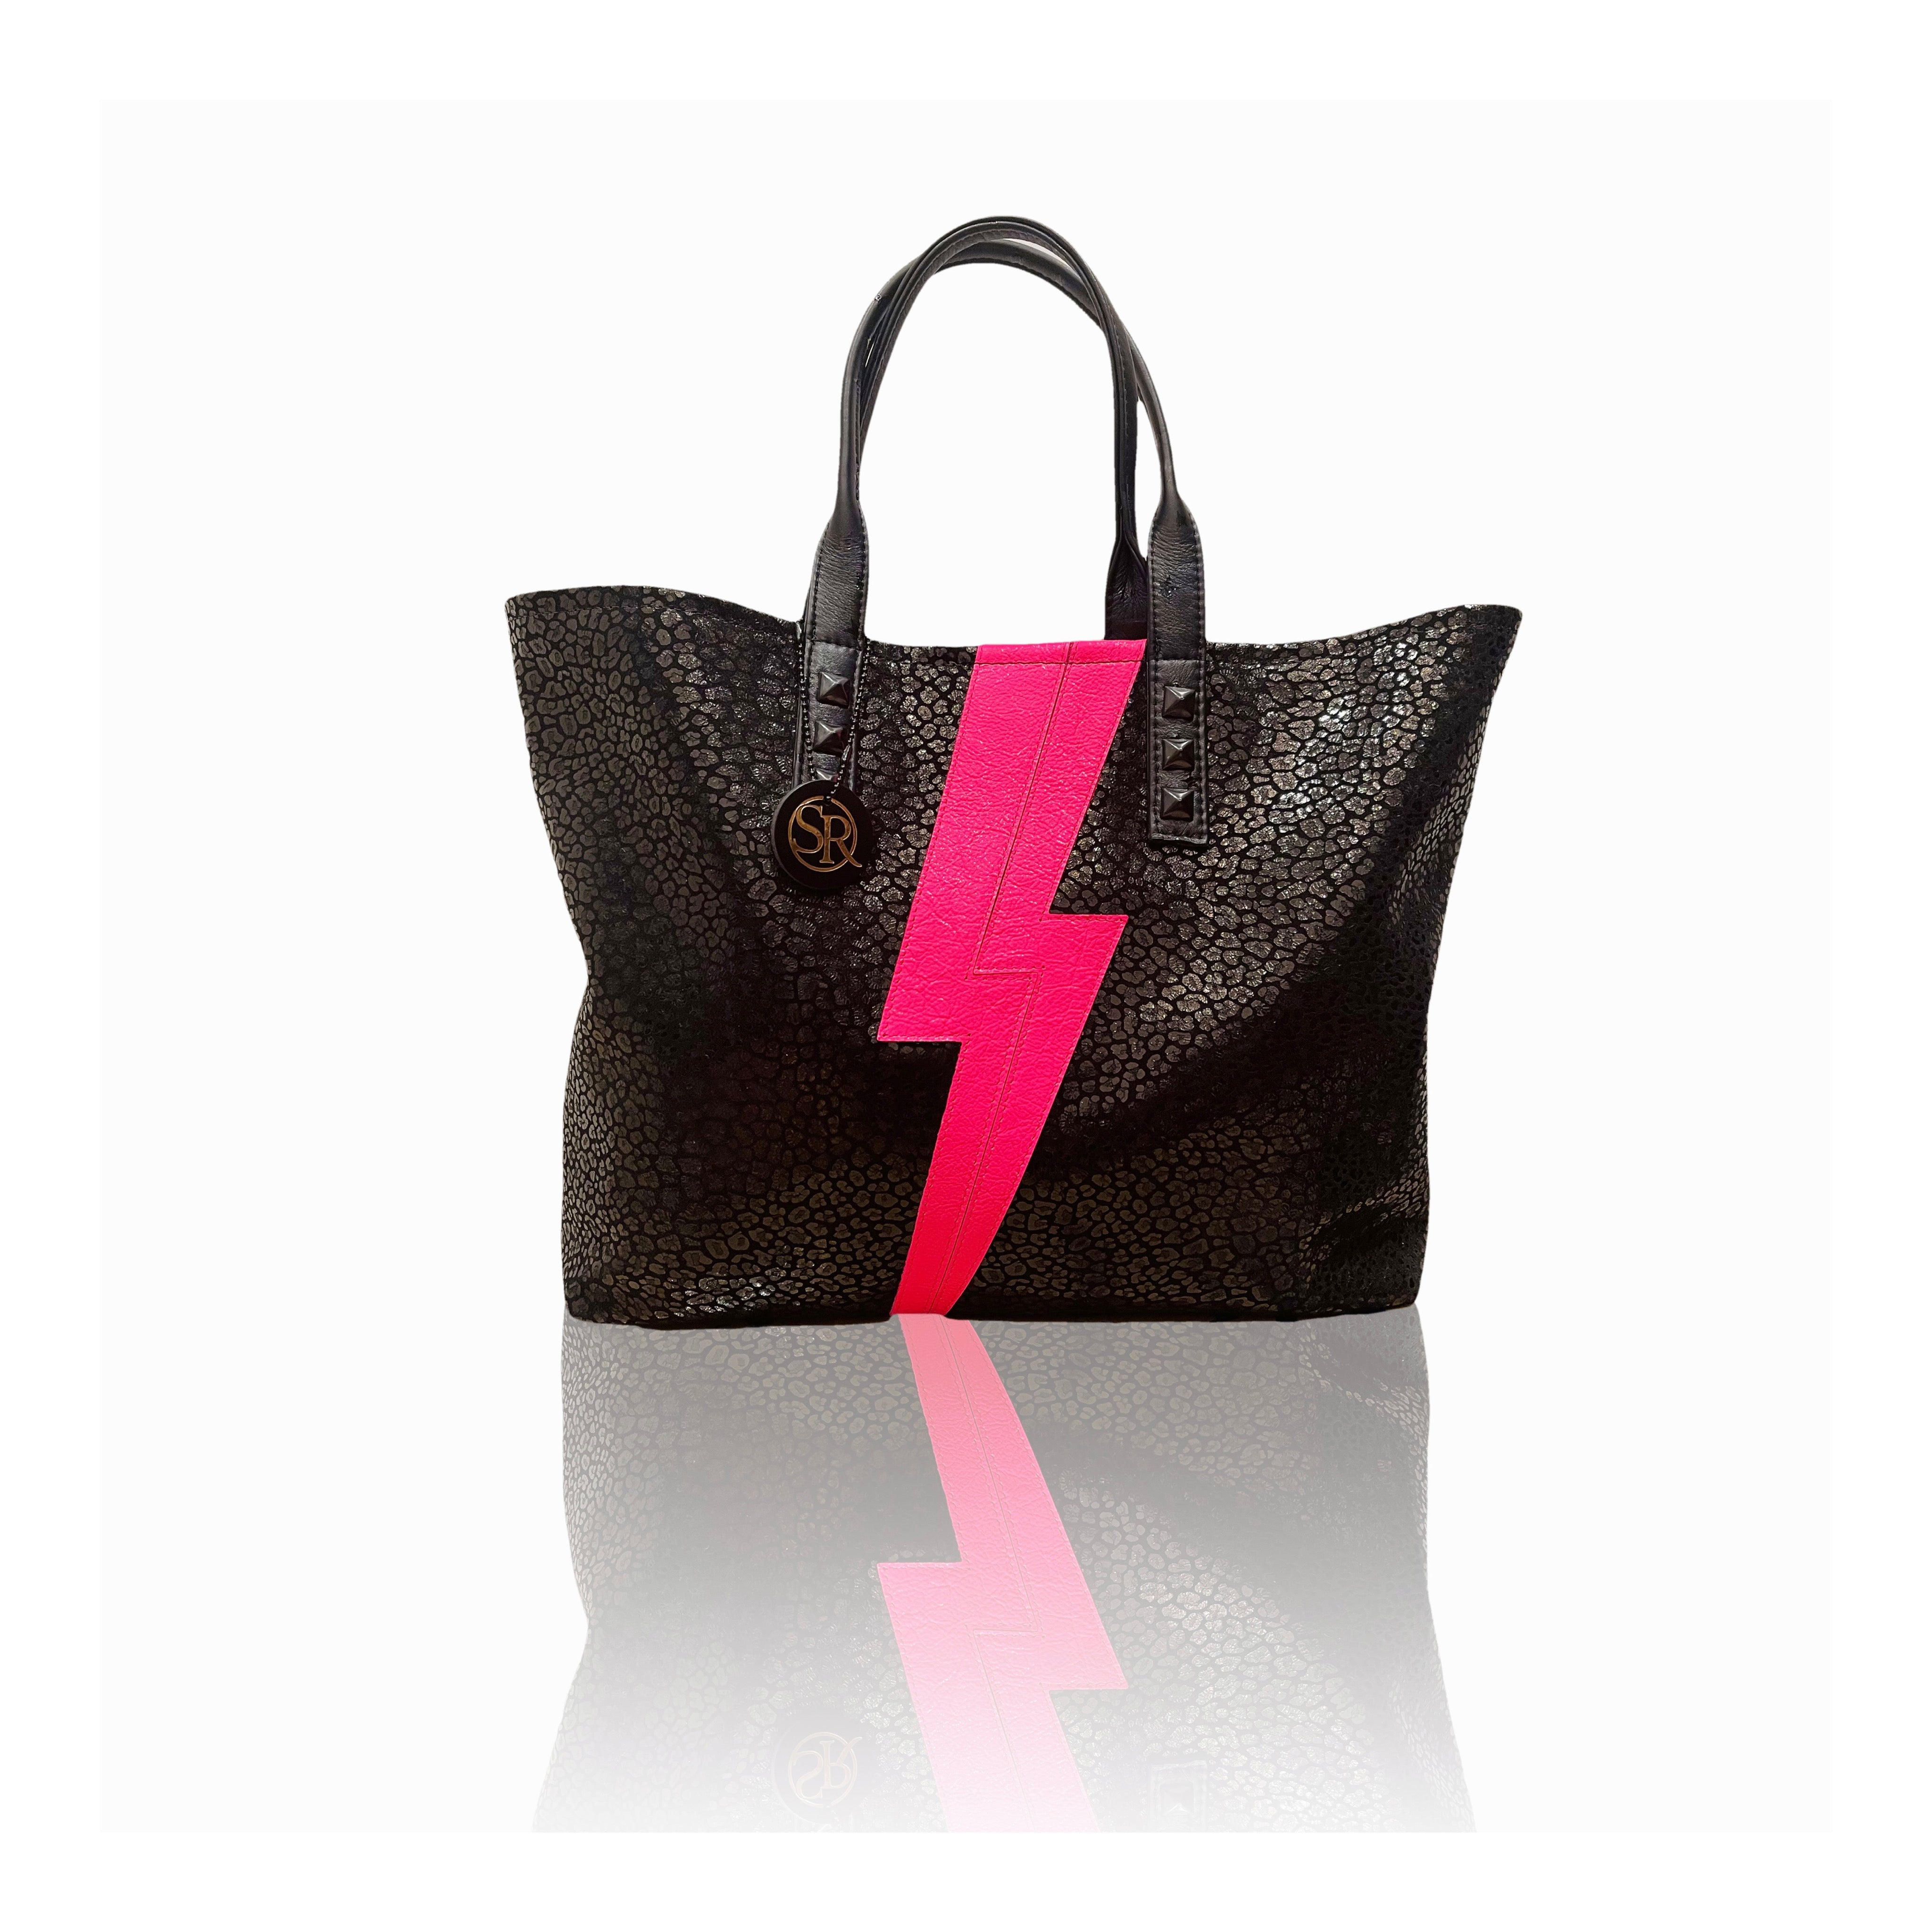 The “Mazzy” Tote Pink Bolt